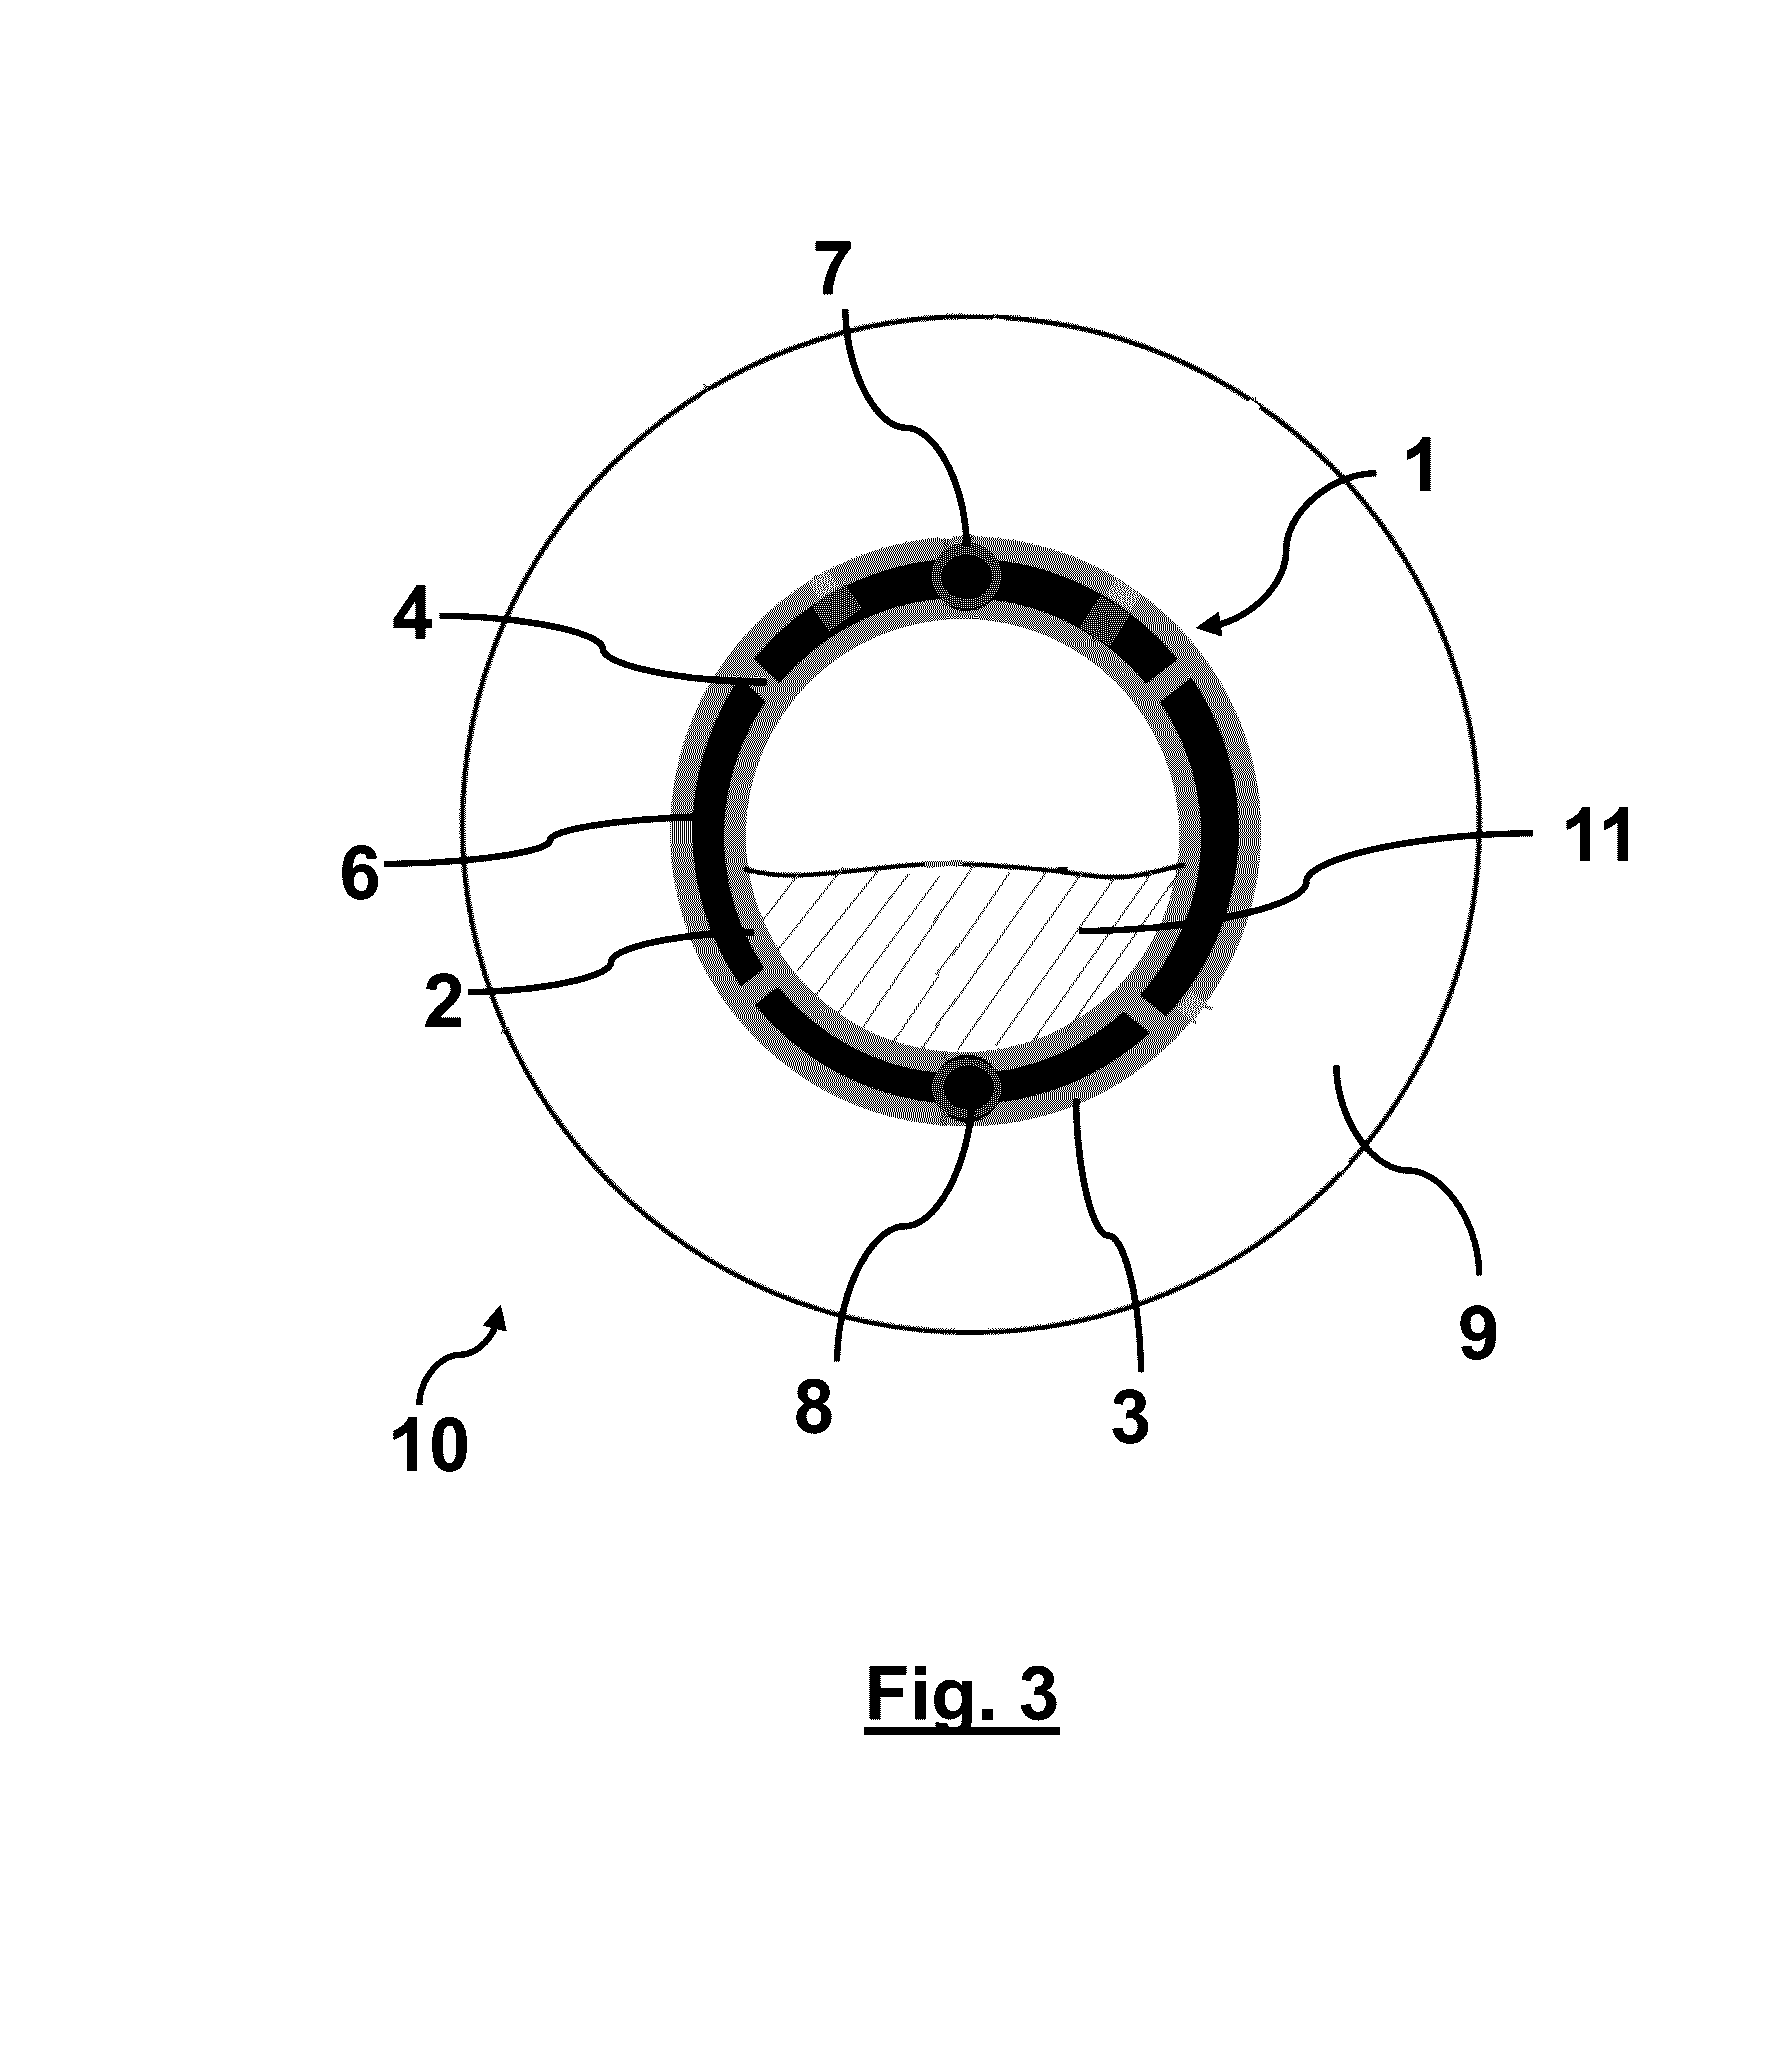 Double-walled pipe with integrated heating capability for an aircraft or spacecraft